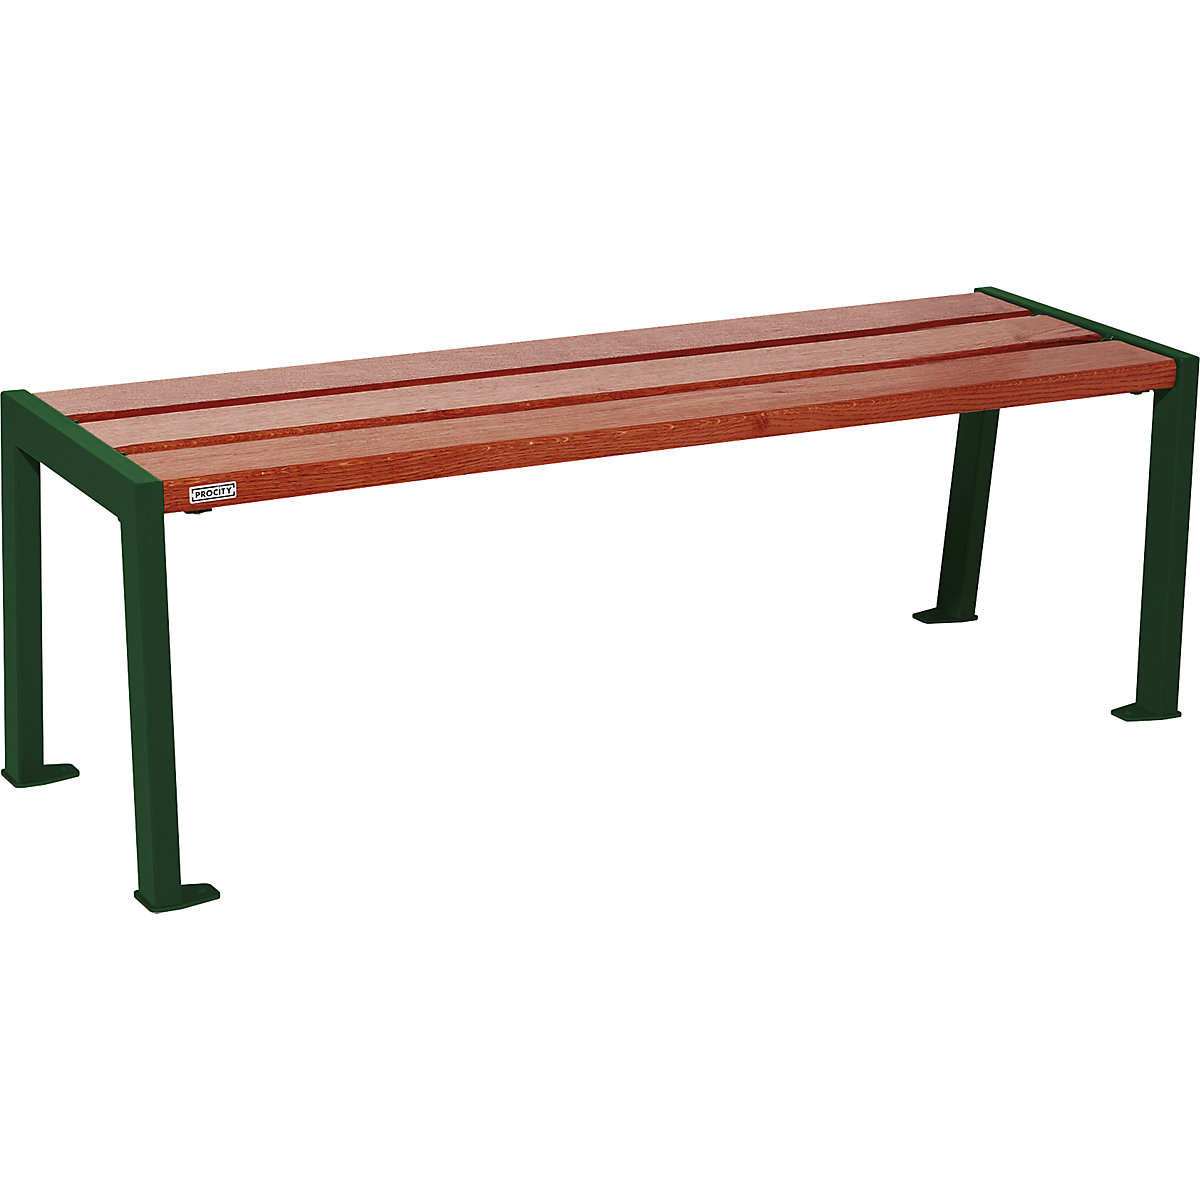 SILAOS® wooden bench without back rest – PROCITY, height 437 mm, length 1200 mm, moss green, mahogany-7